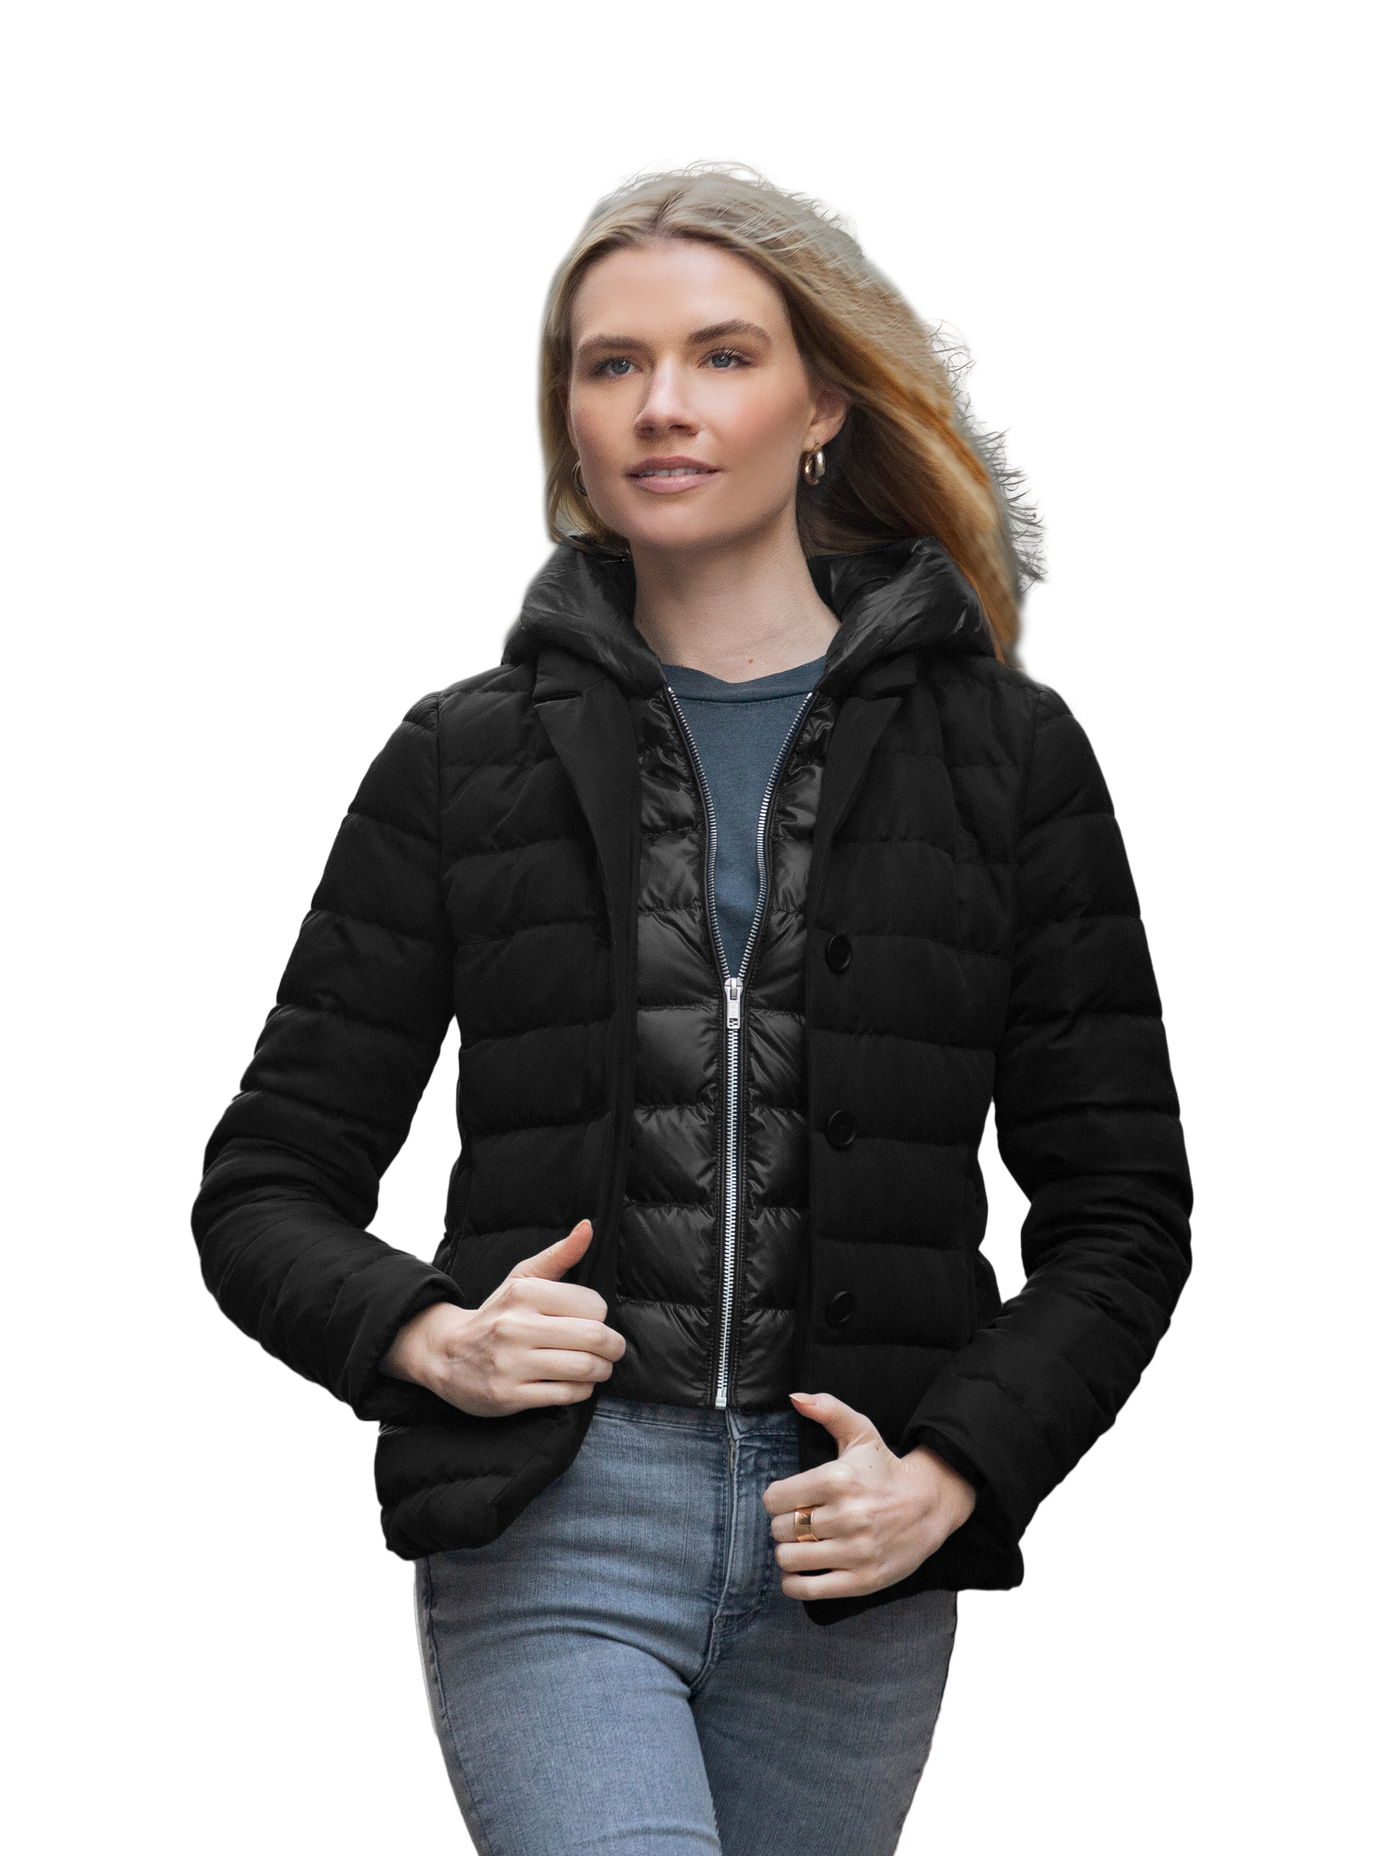 The Devon 2-1 Down Jacket with removable hood - Warehouse 60% Sale, Final sale, no exchanges or returns